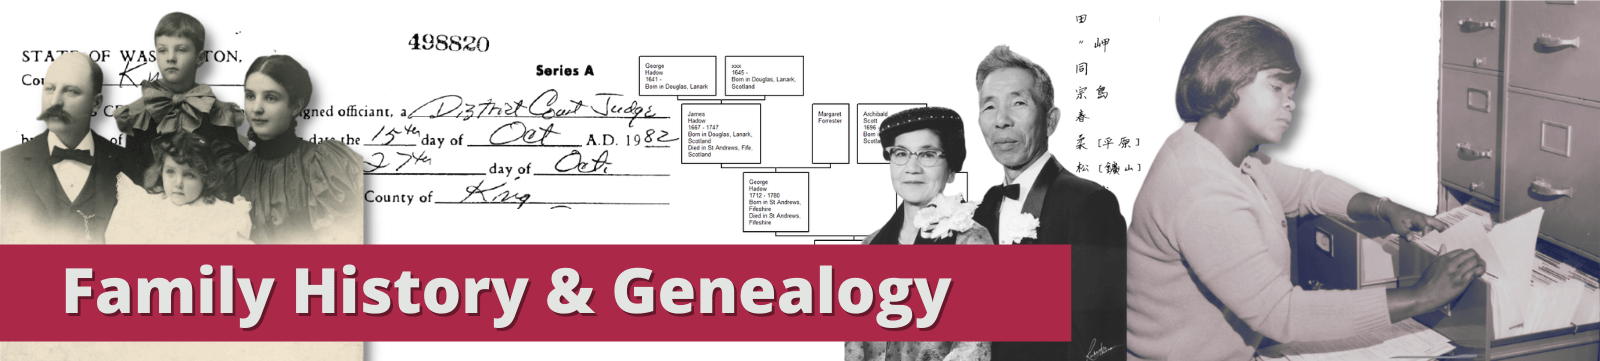 Family History and Genealogy Guide